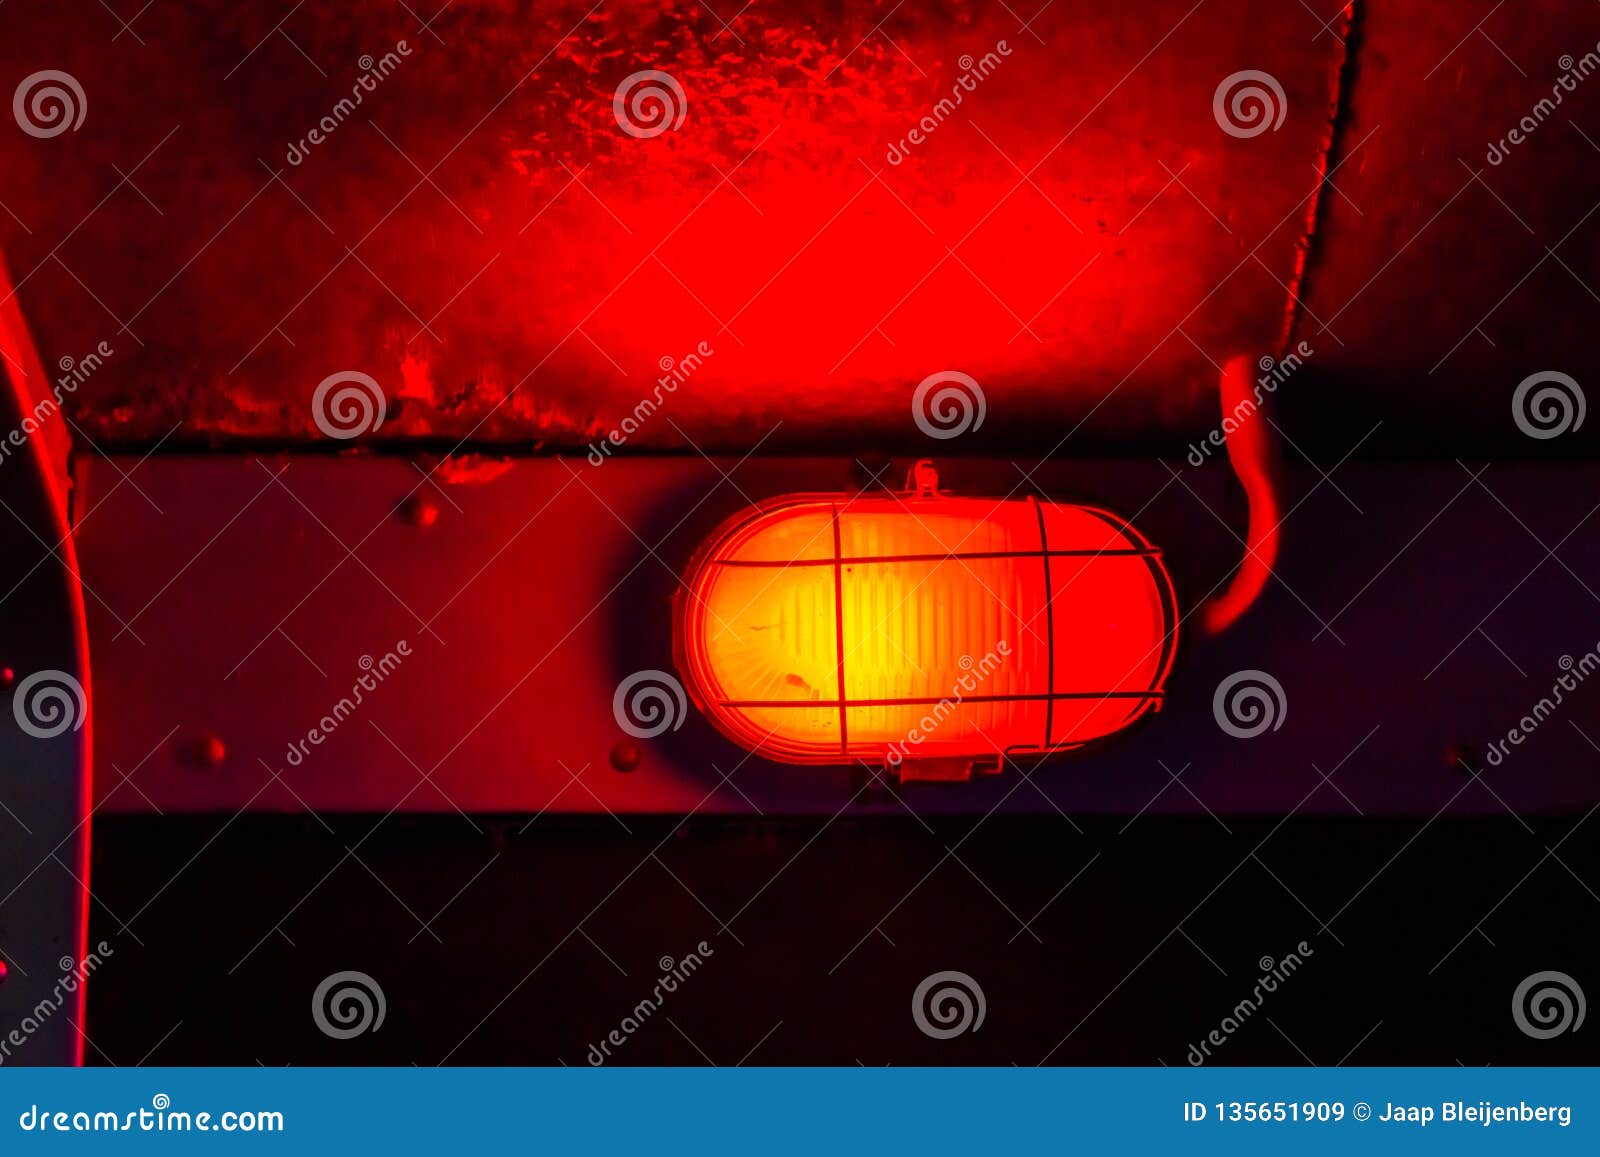 Red Light Shining In A Submarine Interior Of A Underwater